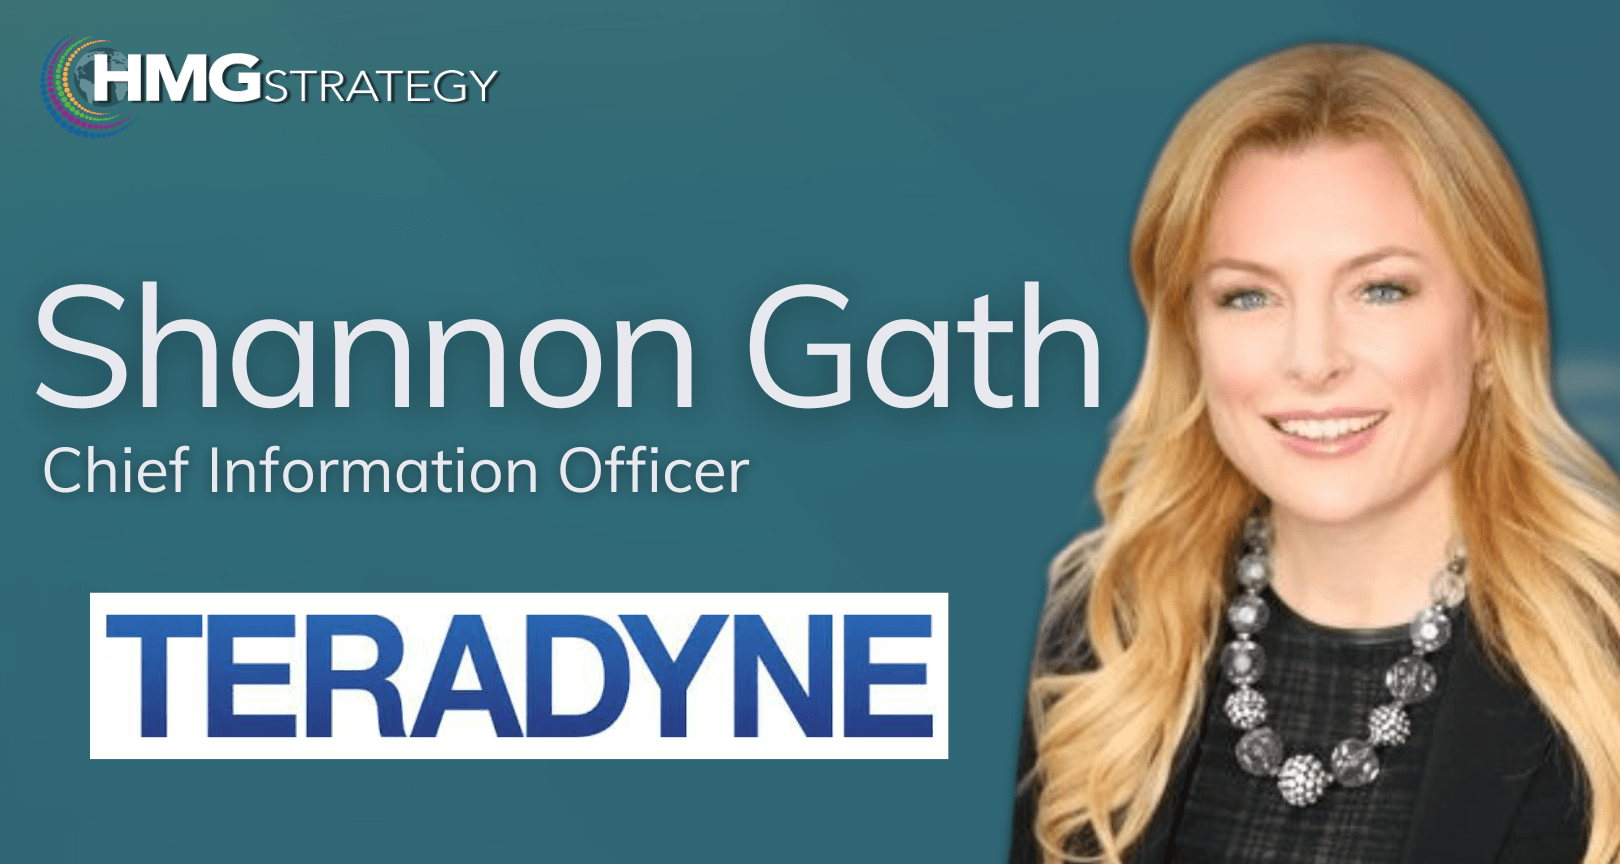 Shannon Gath, CIO, Teradyne: Restructuring the IT Organization to Become More Business Centric, Chief Information Officer, of Teradyne